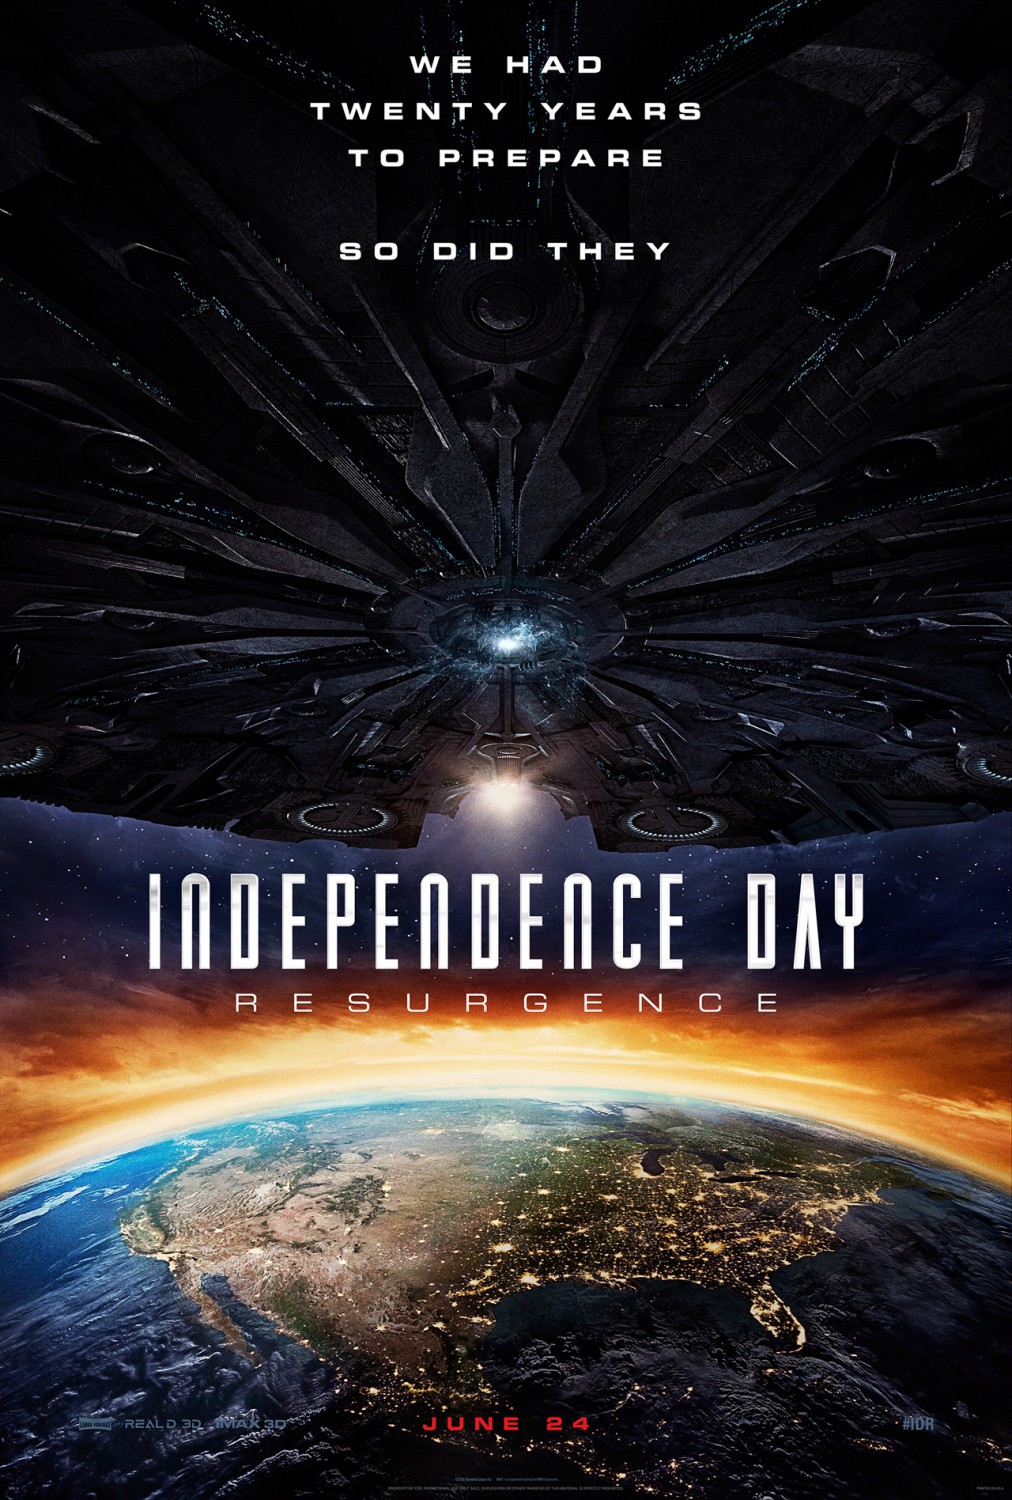 independence day resurgence affiche - We Had Twenty Years To Prepare So Did They Lodependence Day Resurgence